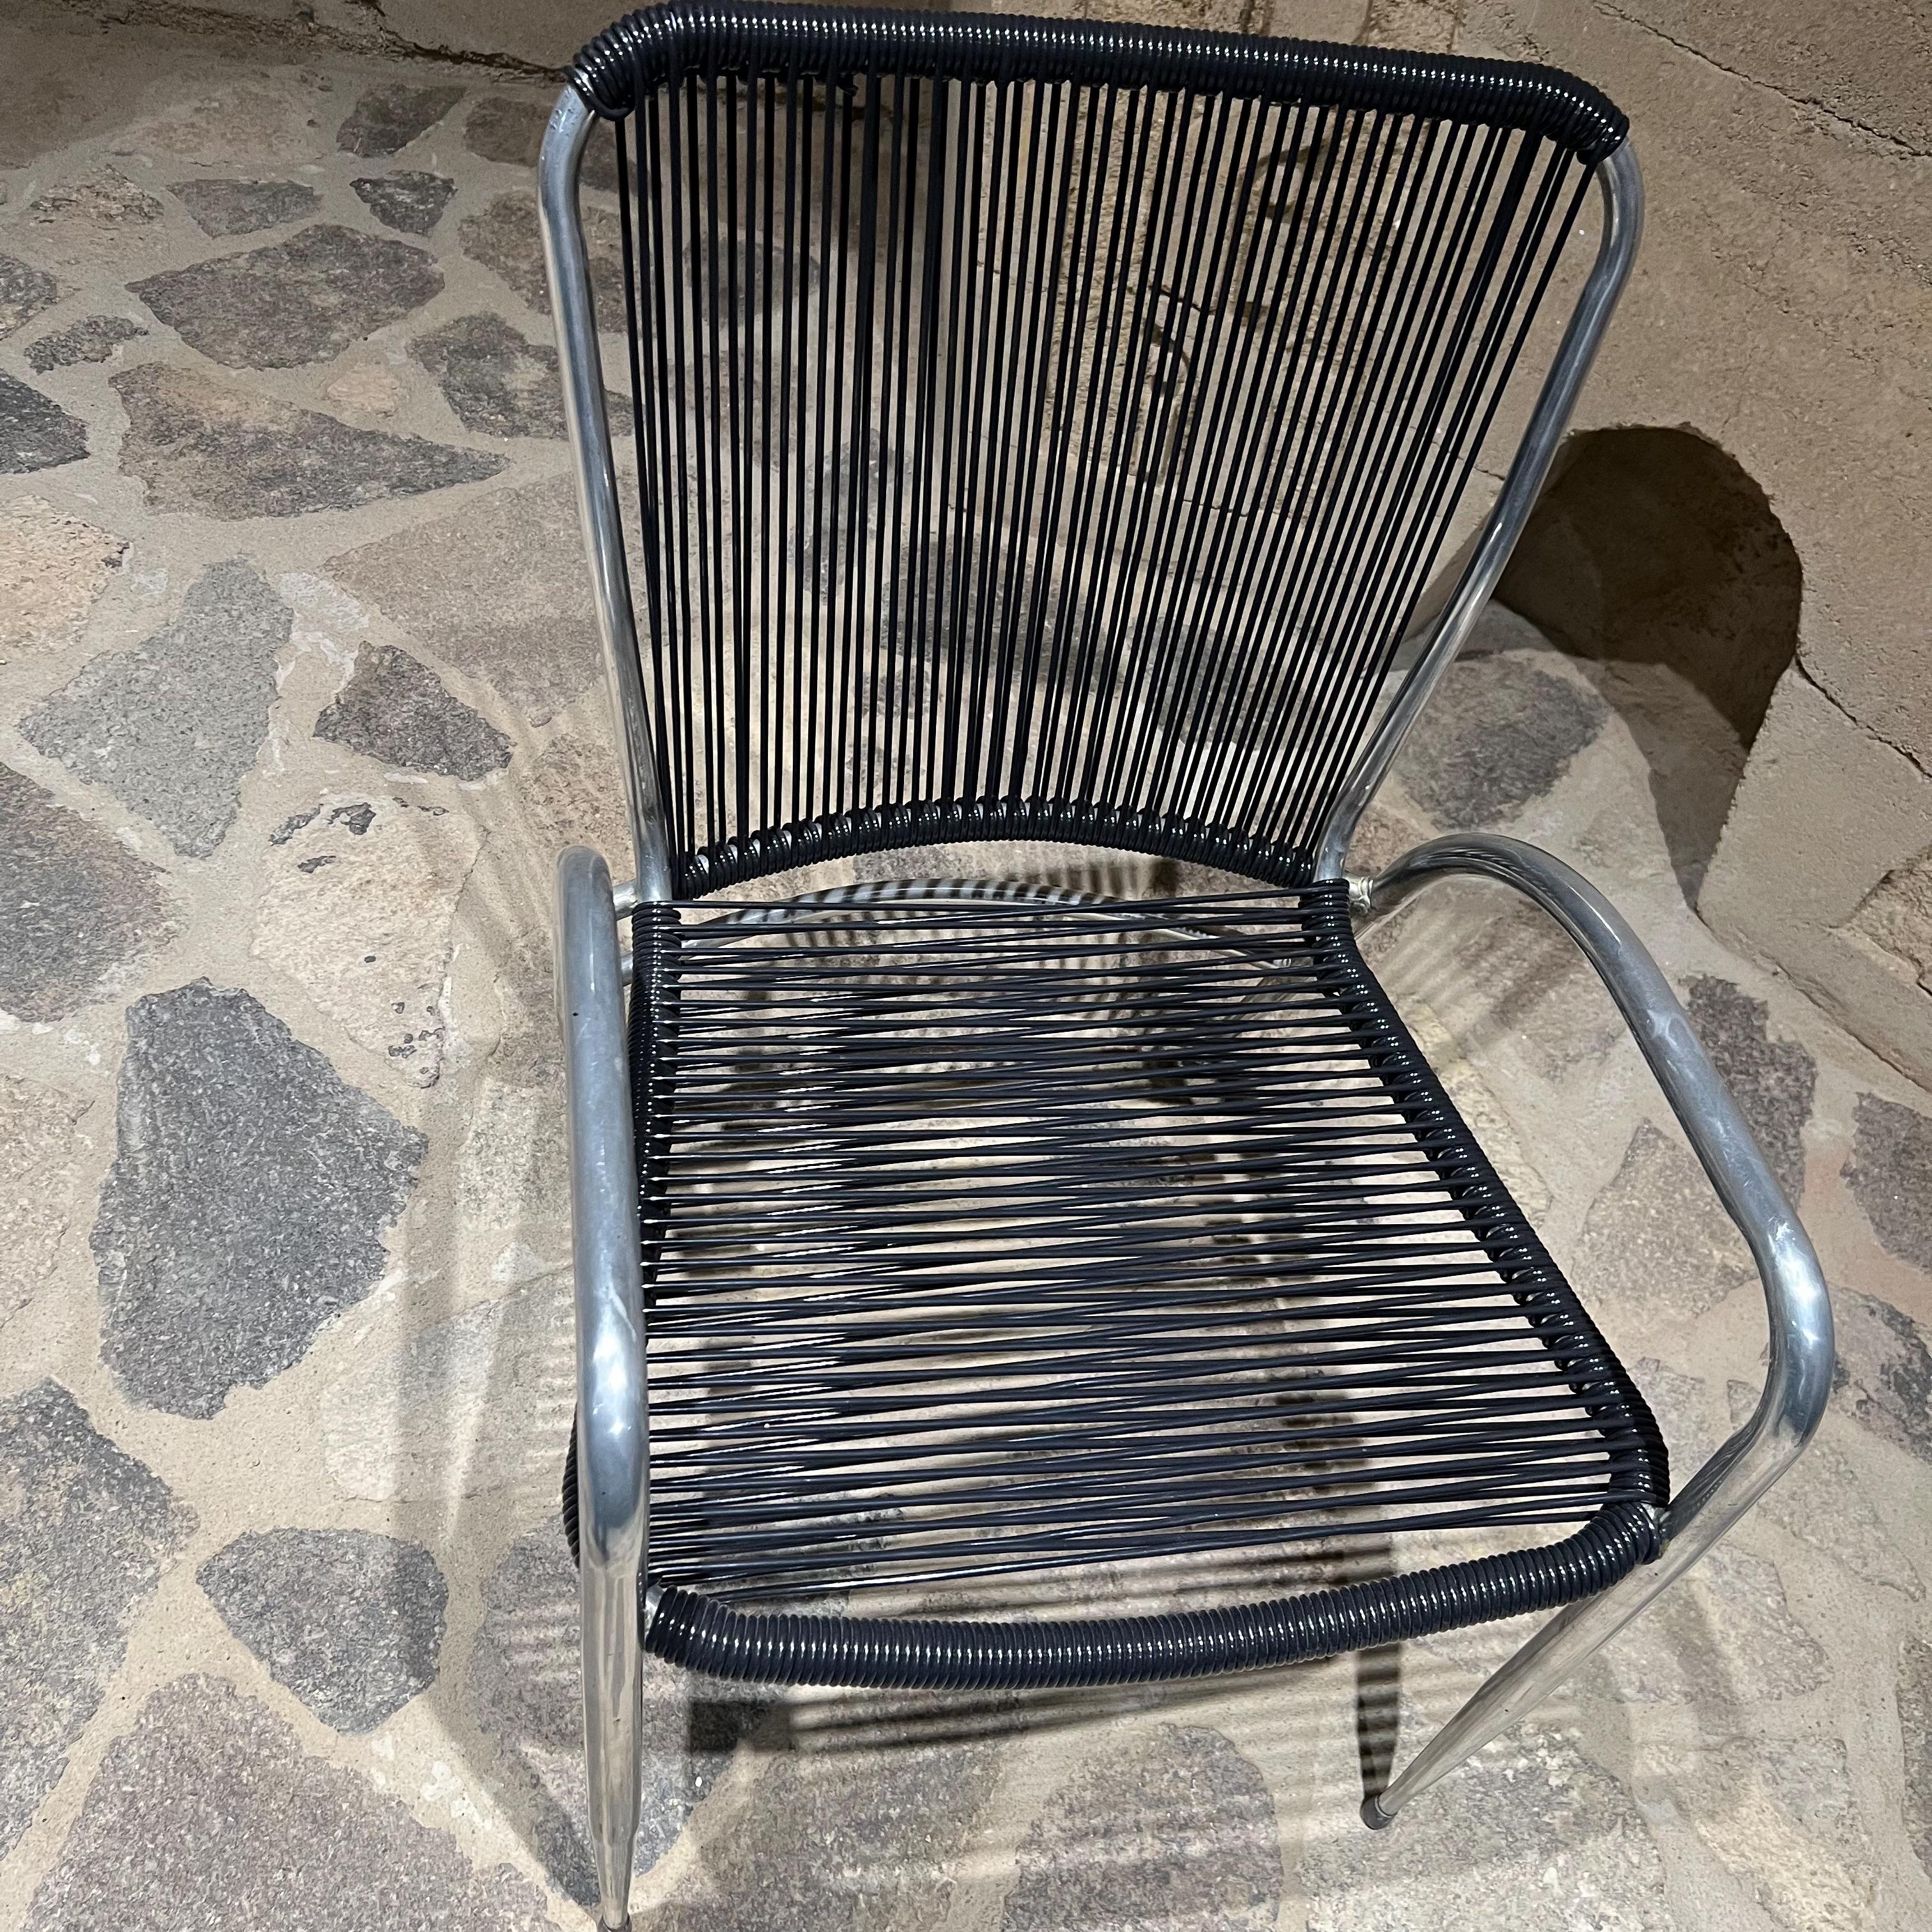 Sculptural Patio chairs
1960s set of two sculptural patio chairs by Brown Jordan in Polished Aluminum and new woven black plastic. 
Designed after Walter Lamb
Measures: 30.75 H x 20.25 W x 24.75 D, Seat 15.5 Arm 20.75
Preowned vintage condition